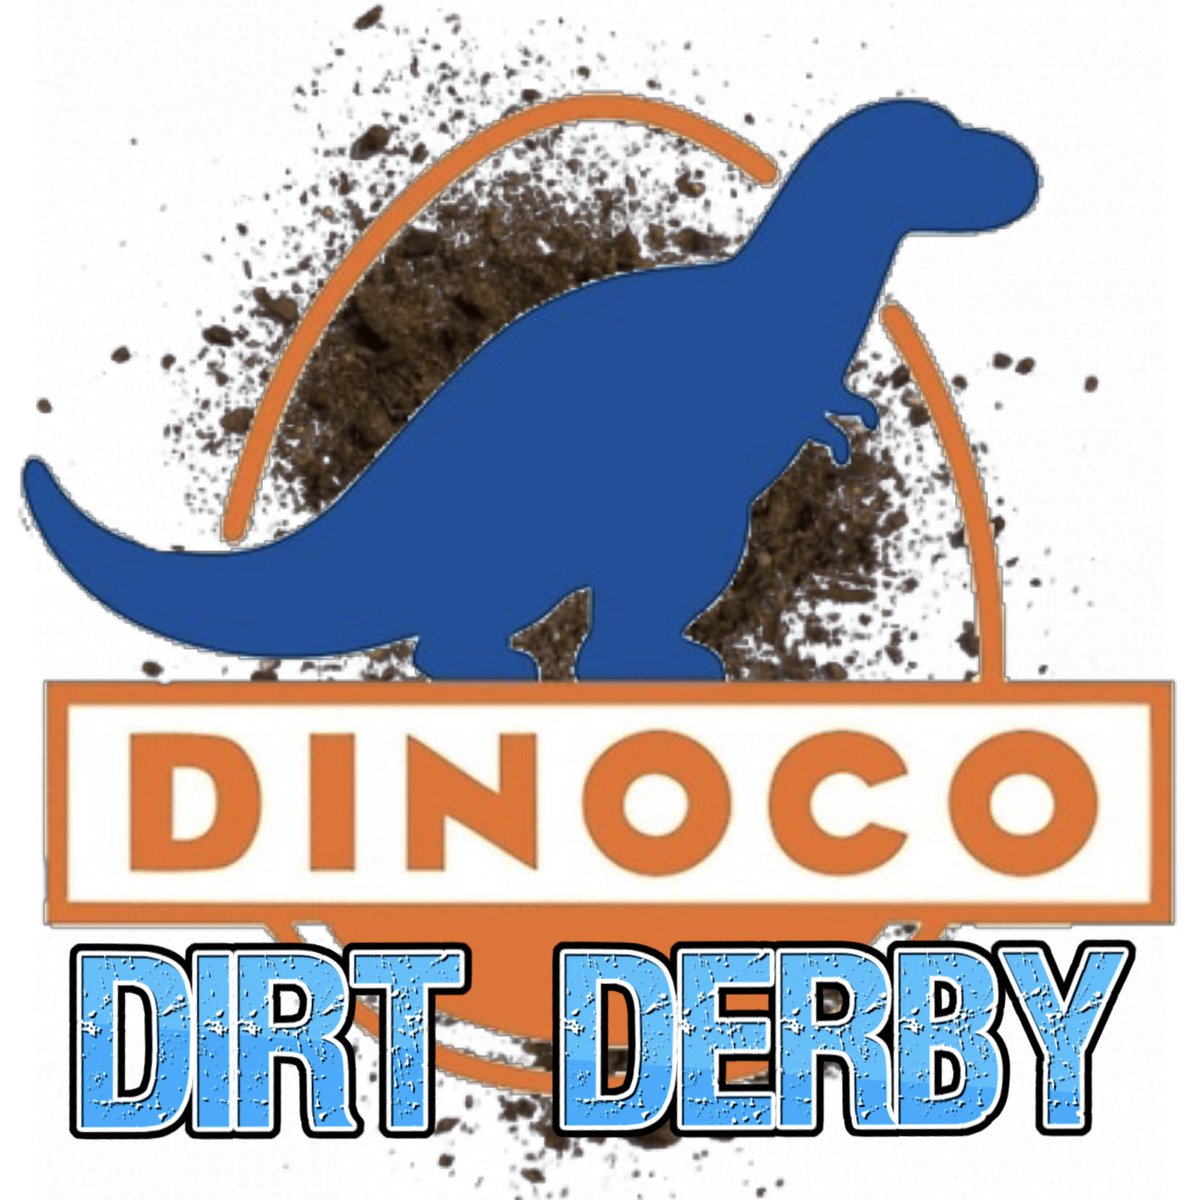 Round 6 will complete the first half of the season at Bristol Motor Speedway. The series will be racing on the dirt in the Dinoco Dirt Derby. #NR2003ignition https://t.co/2eHZdIlaa1